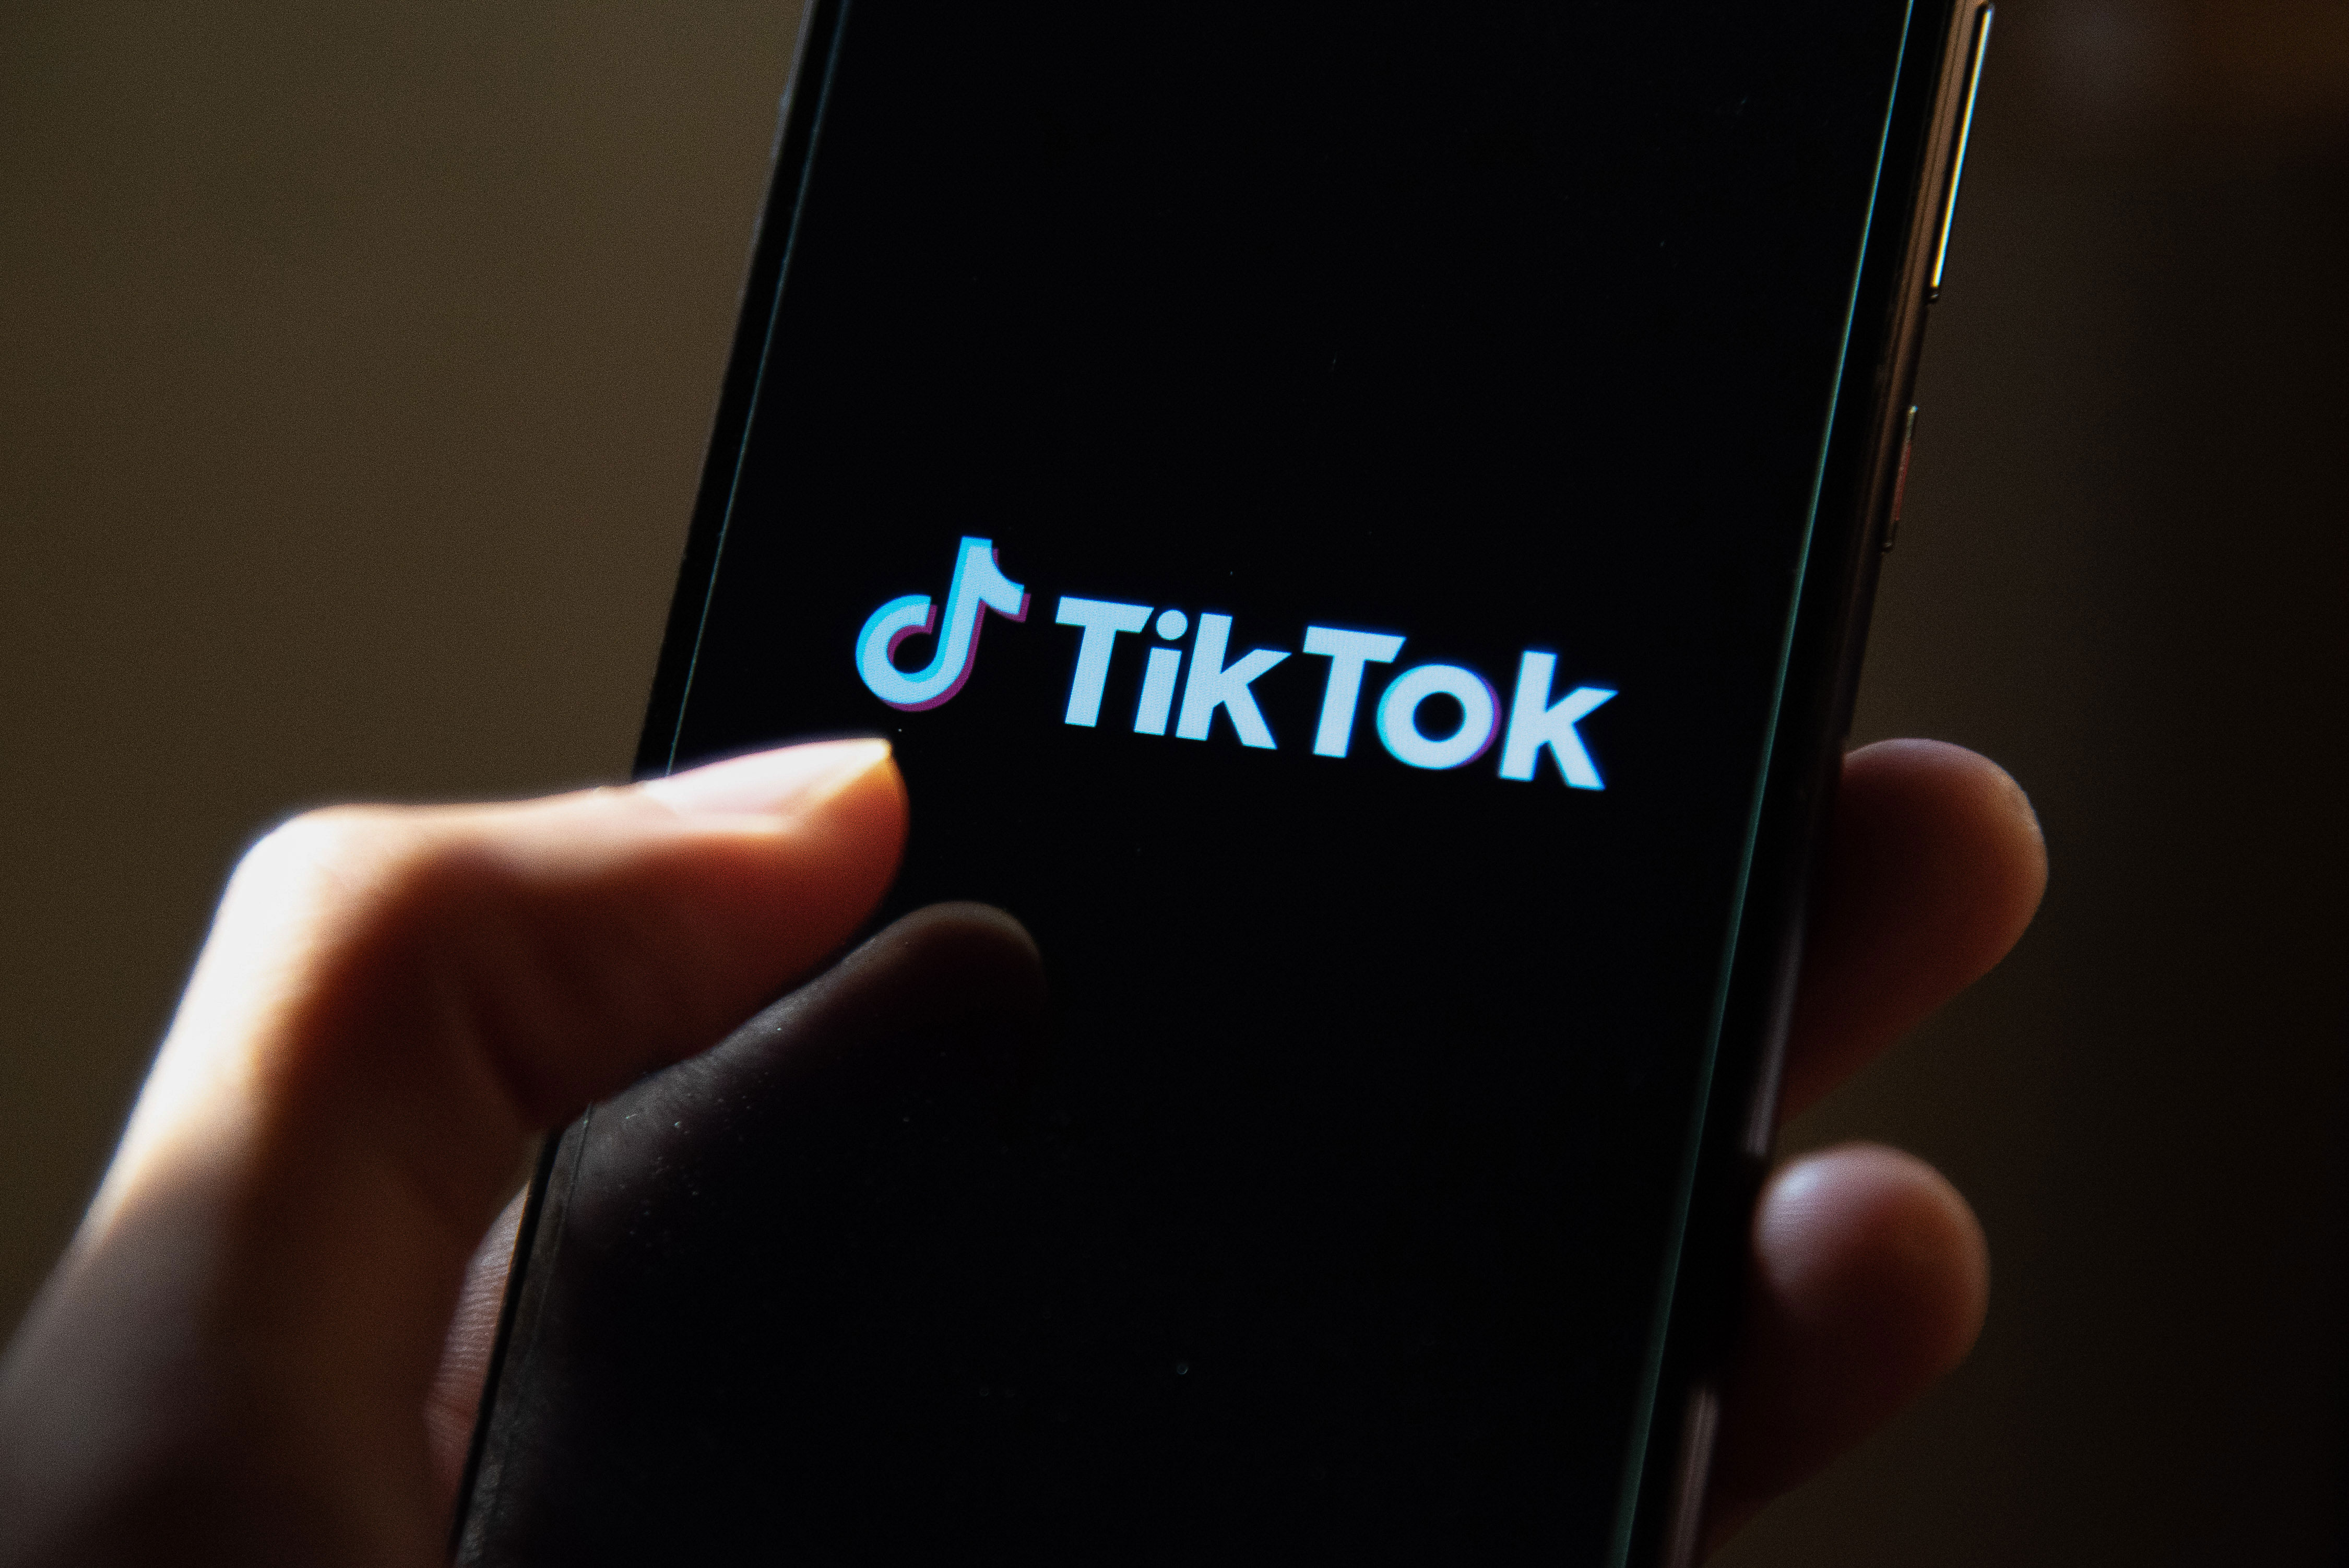 A TikTok logo is seen displayed on a smartphone screen. 